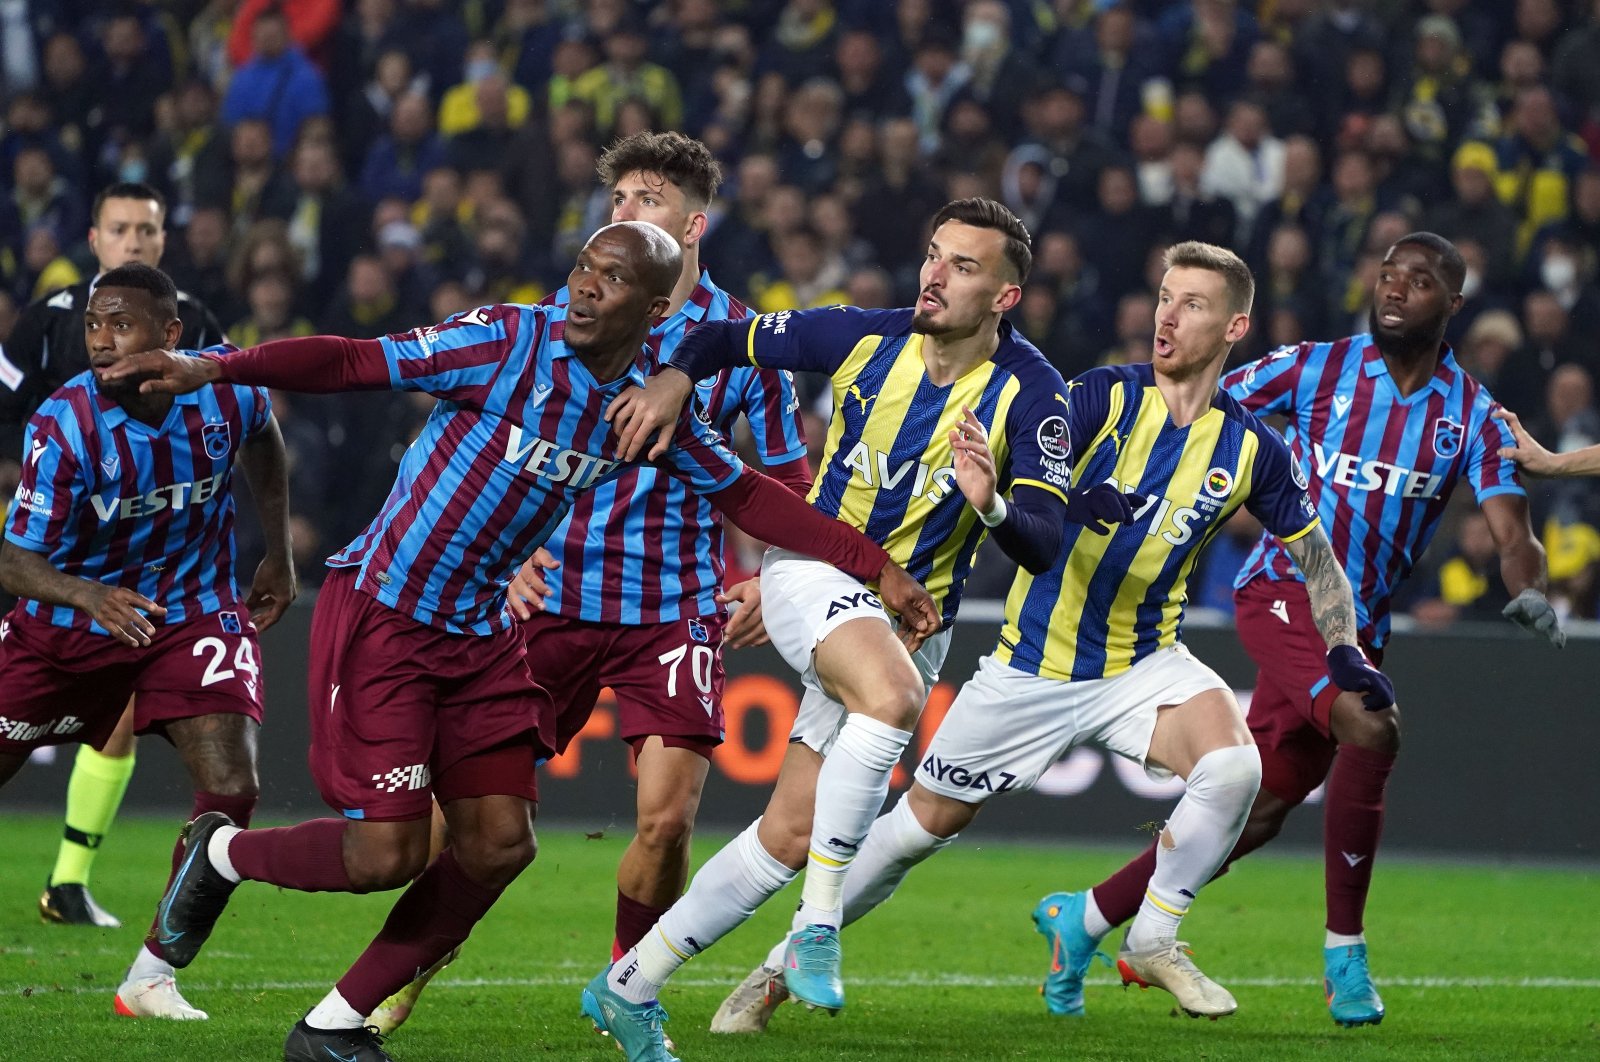 Fenerbahçe and Trabzonspor players in action in a Süper Lig match, Istanbul Turkey, March 6, 2022. (IHA Photo)